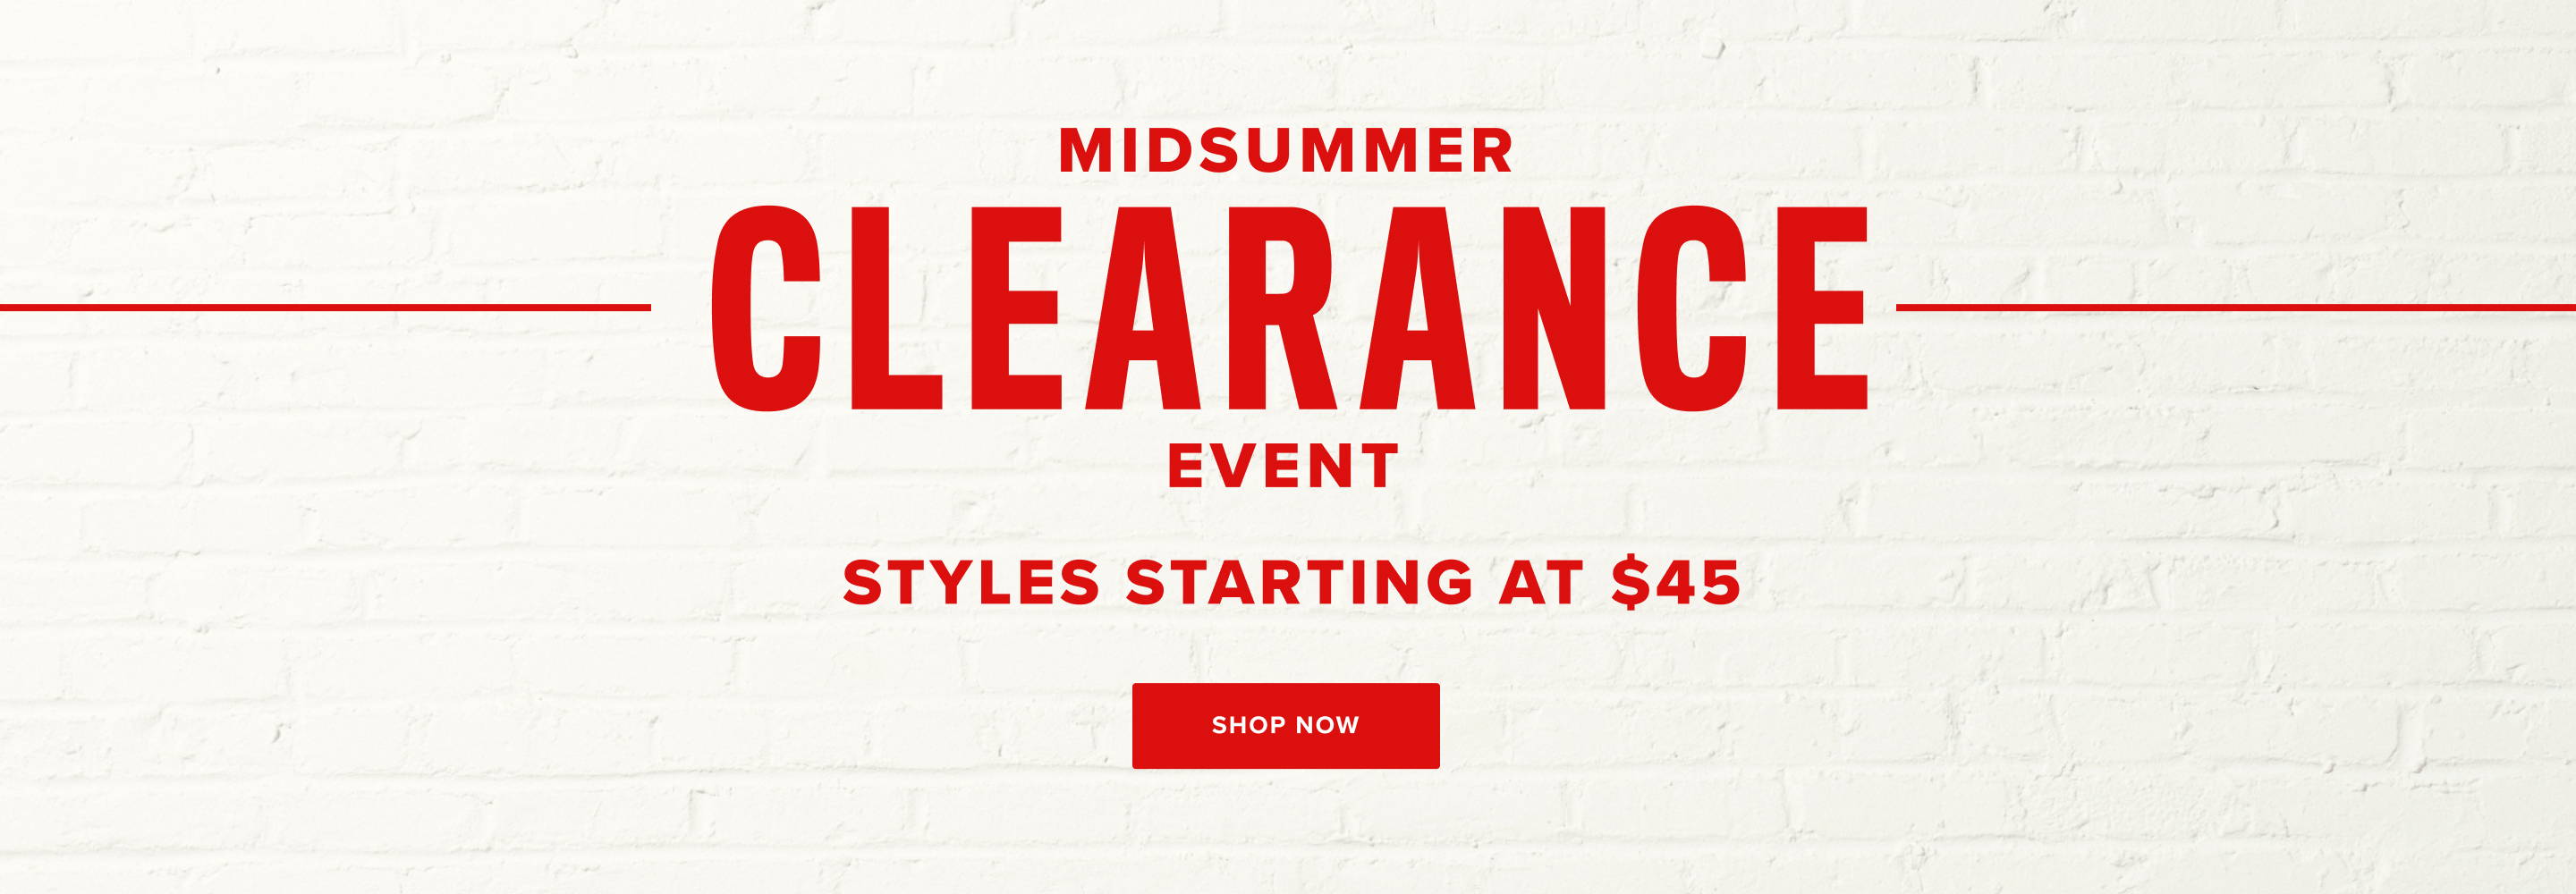 midsummer clearance event. styles starting at $45